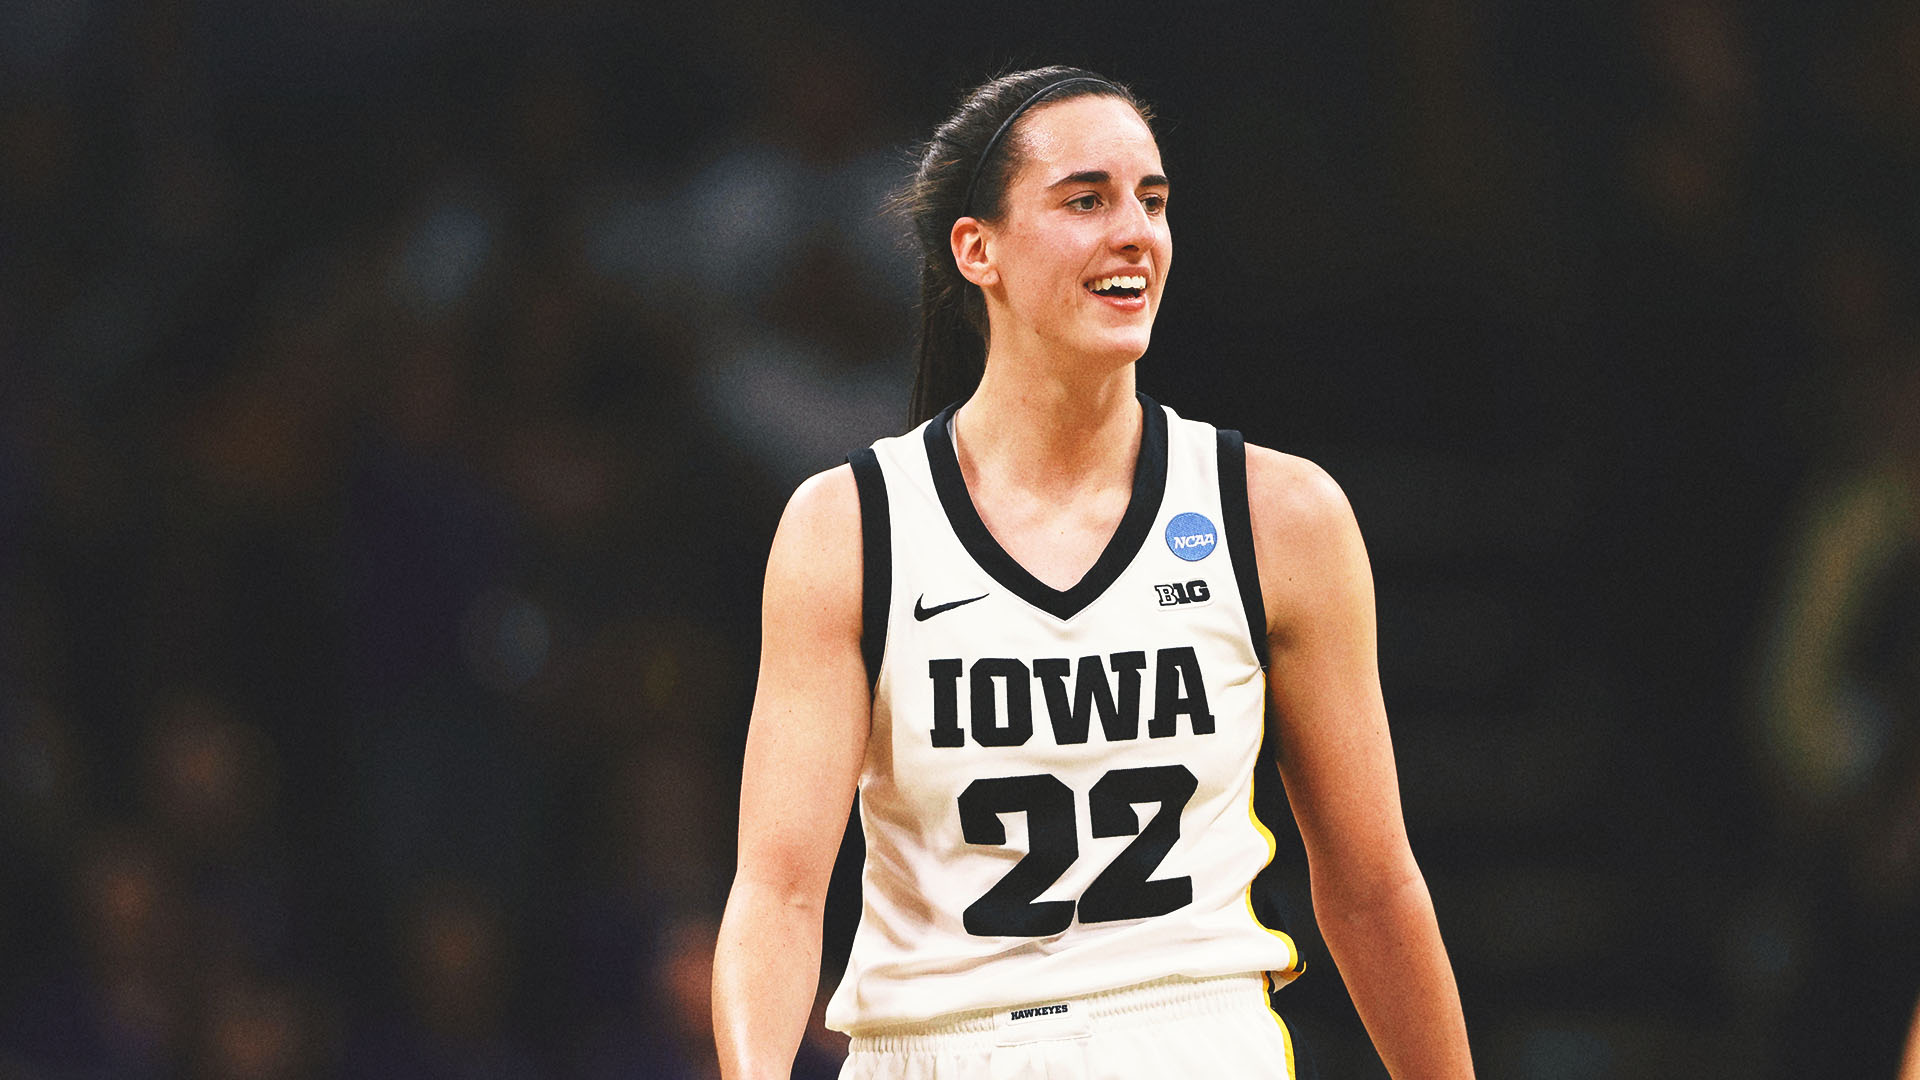 Caitlin Clark drops double-double as No. 1 seed Iowa tops Holy Cross, 91-65